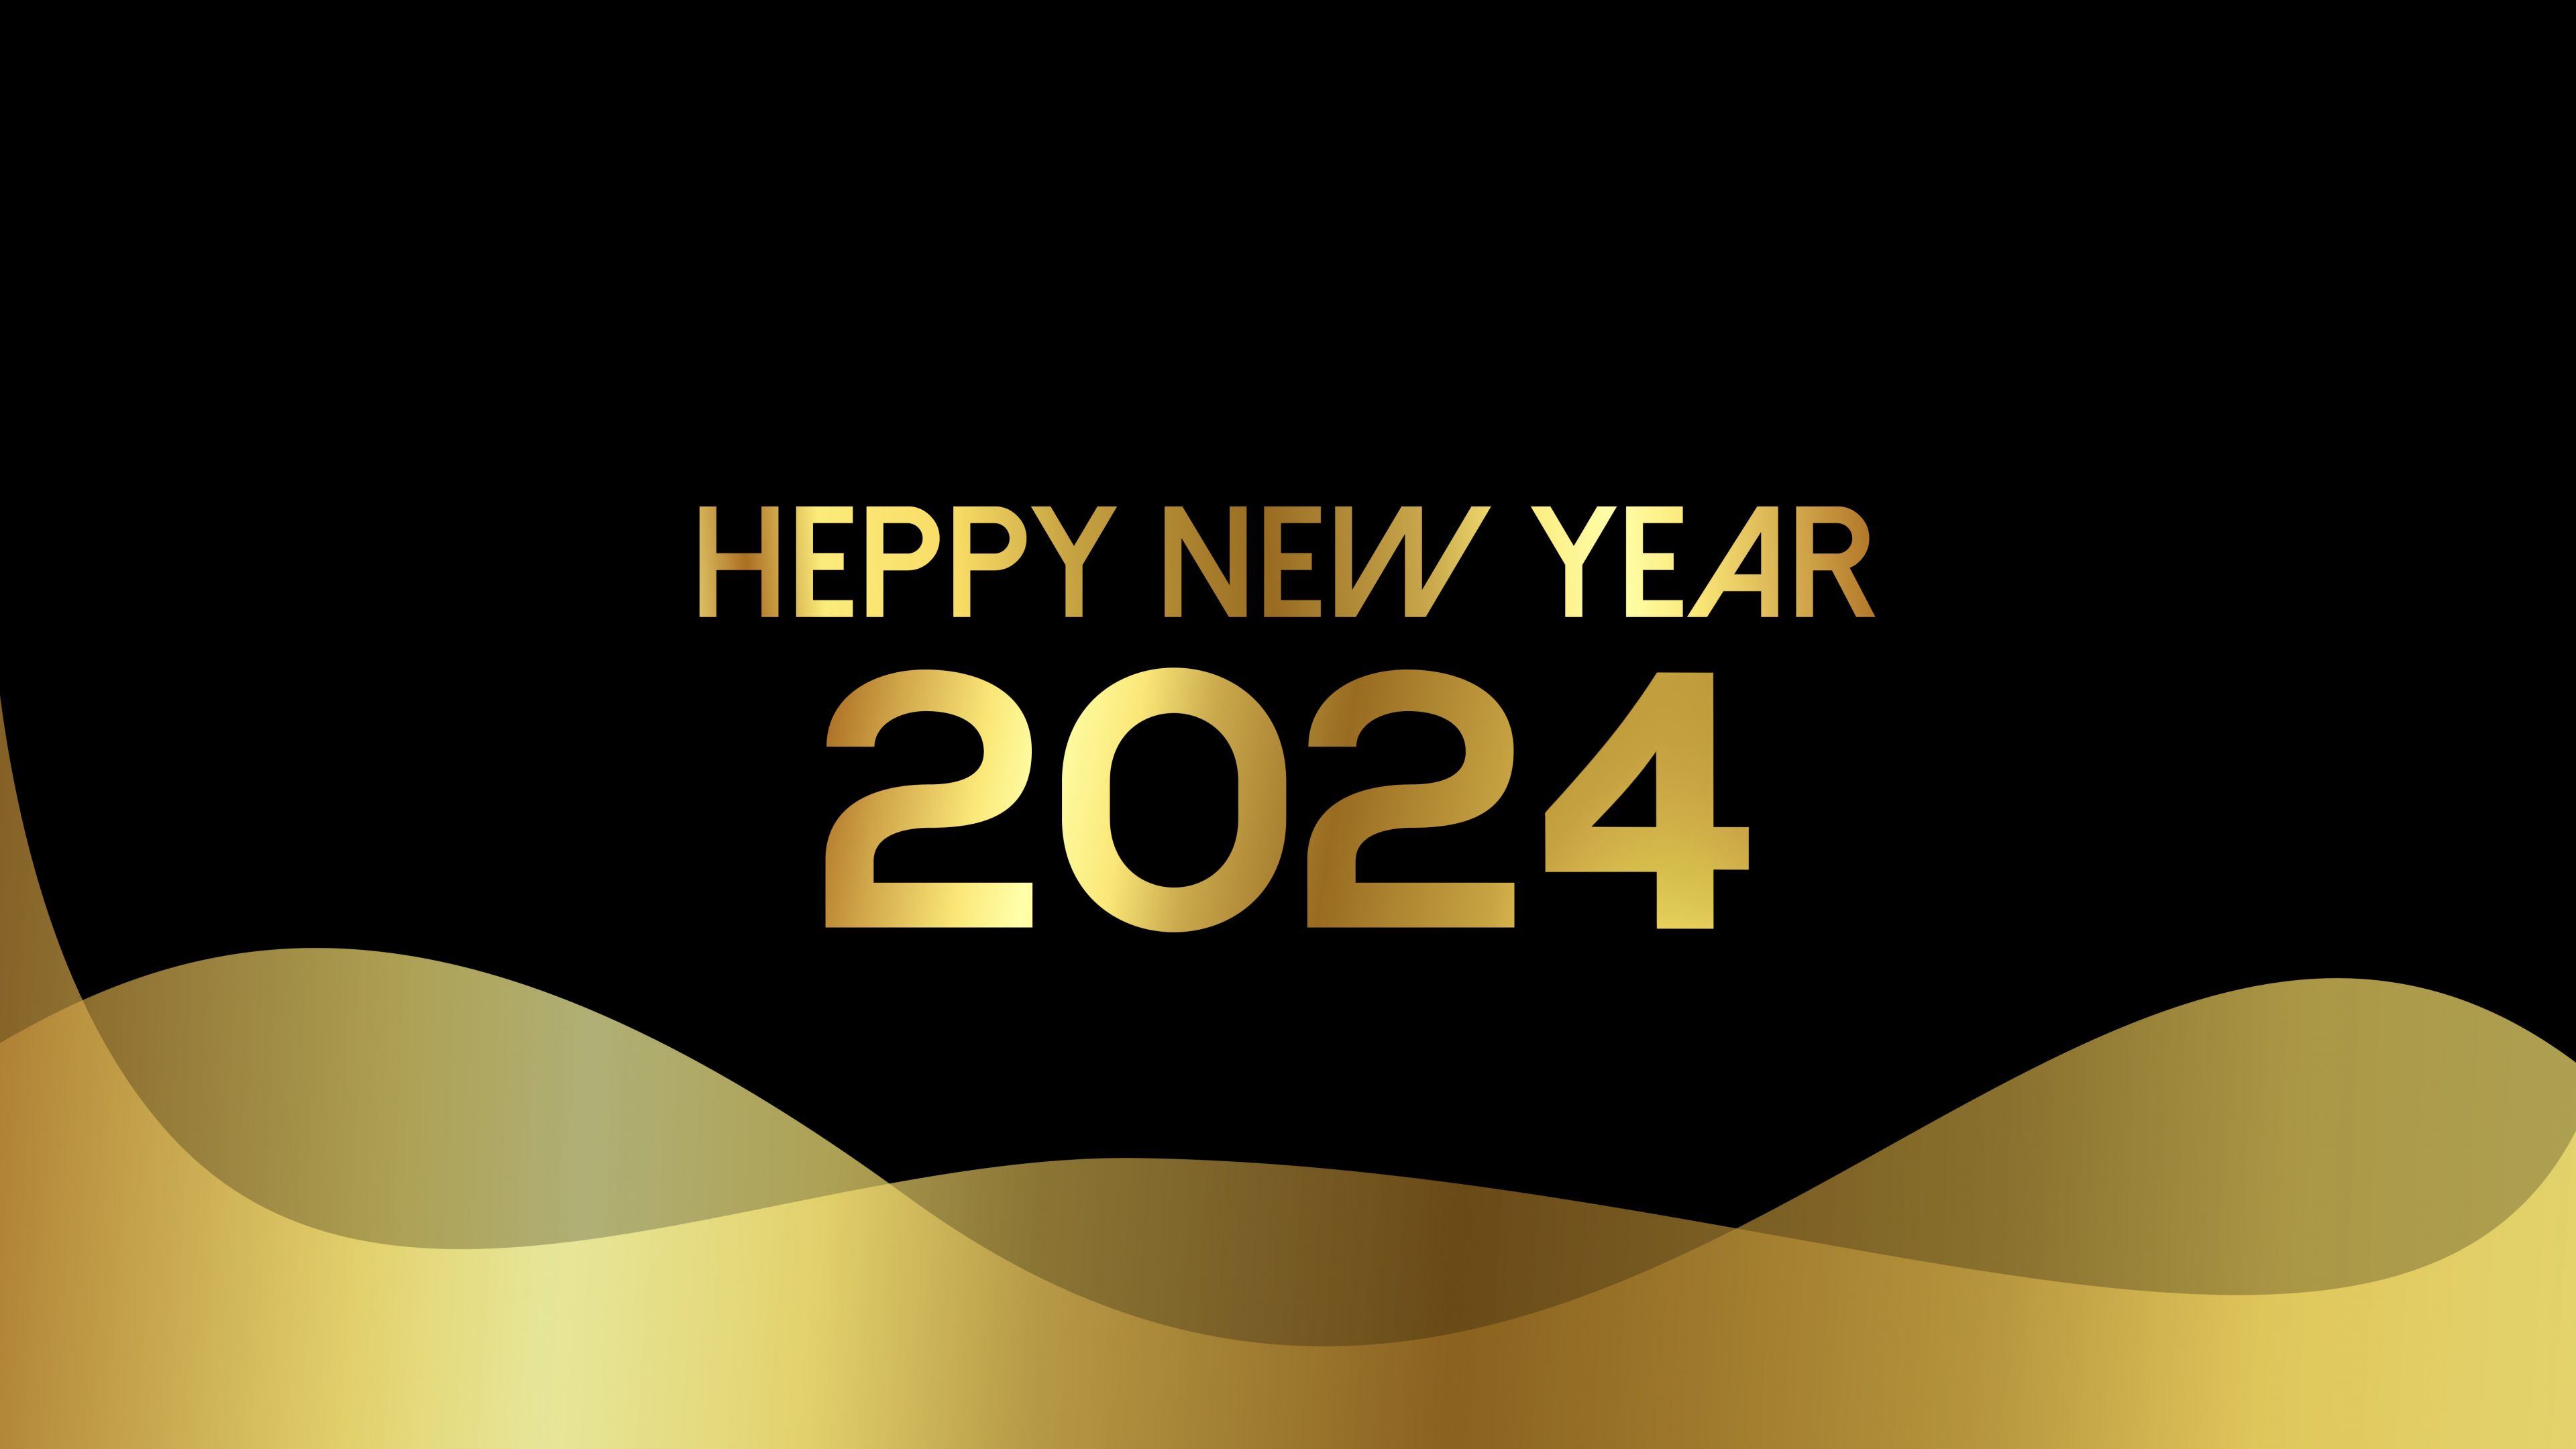 Happy New Year 2024 Wallpaper 4K, Wishes, Golden letters, AMOLED